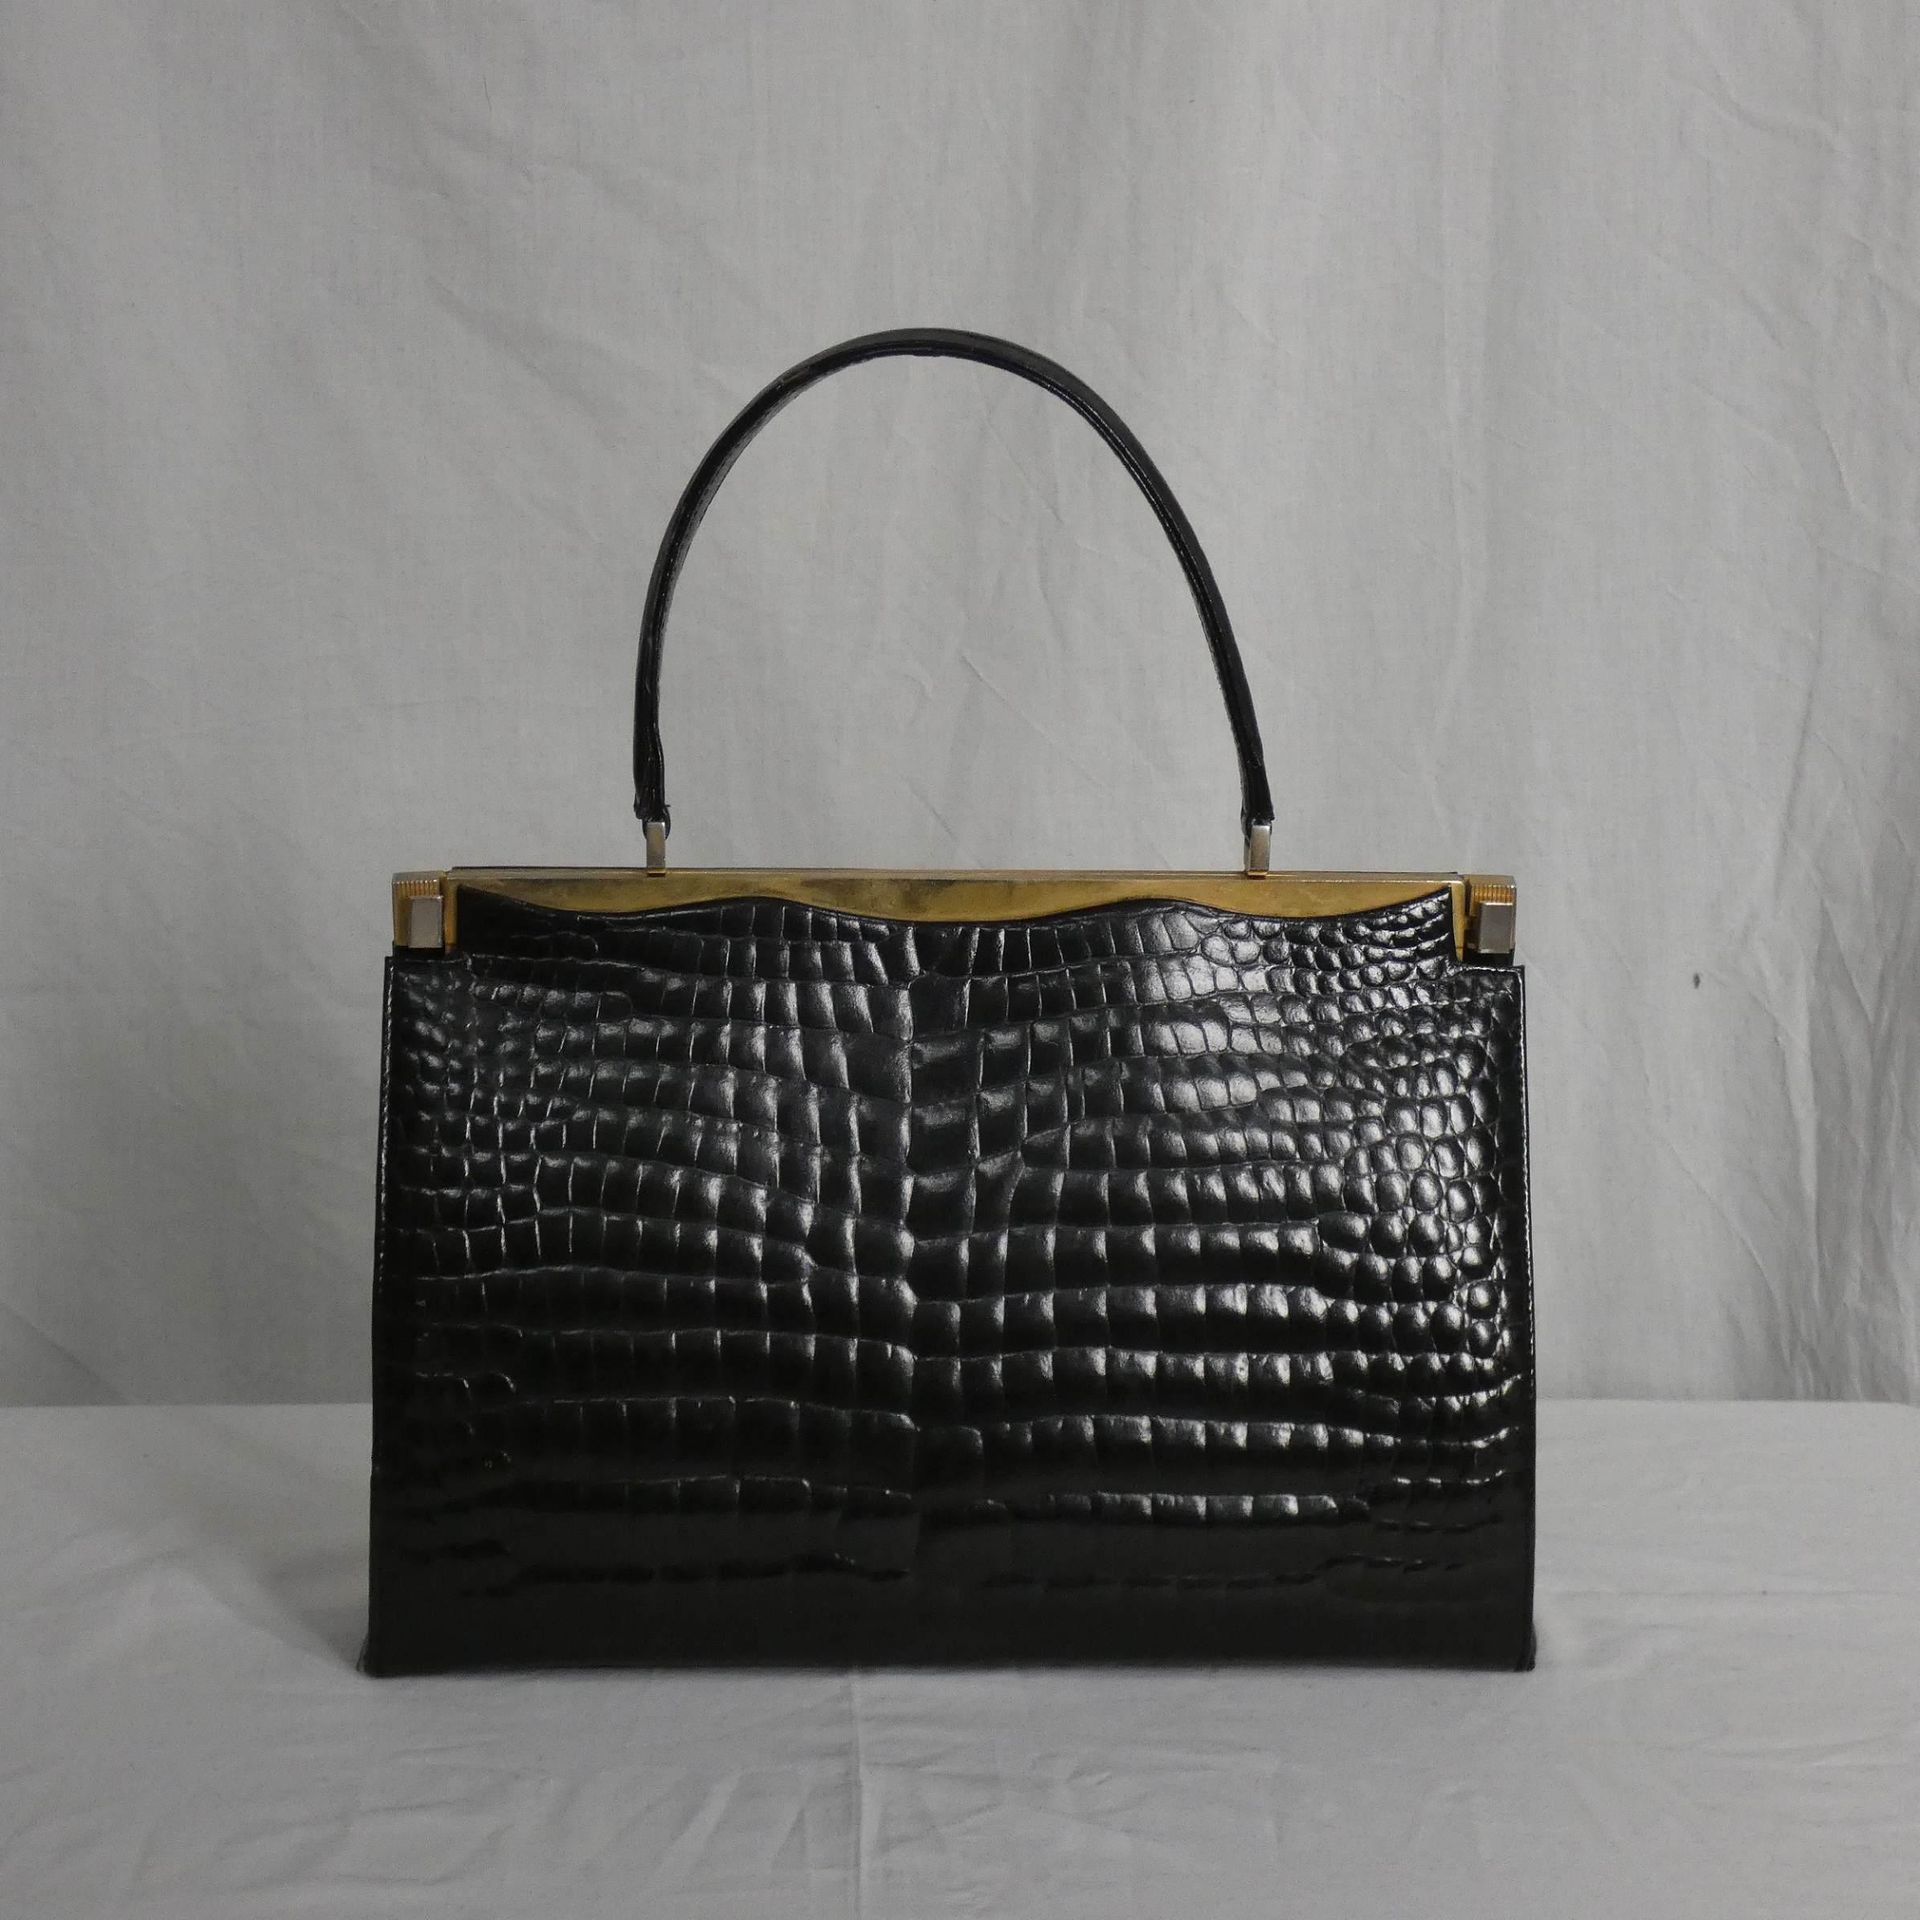 Null Black textured handbag with gold clasp. Single handle.
Dimensions: height 3&hellip;